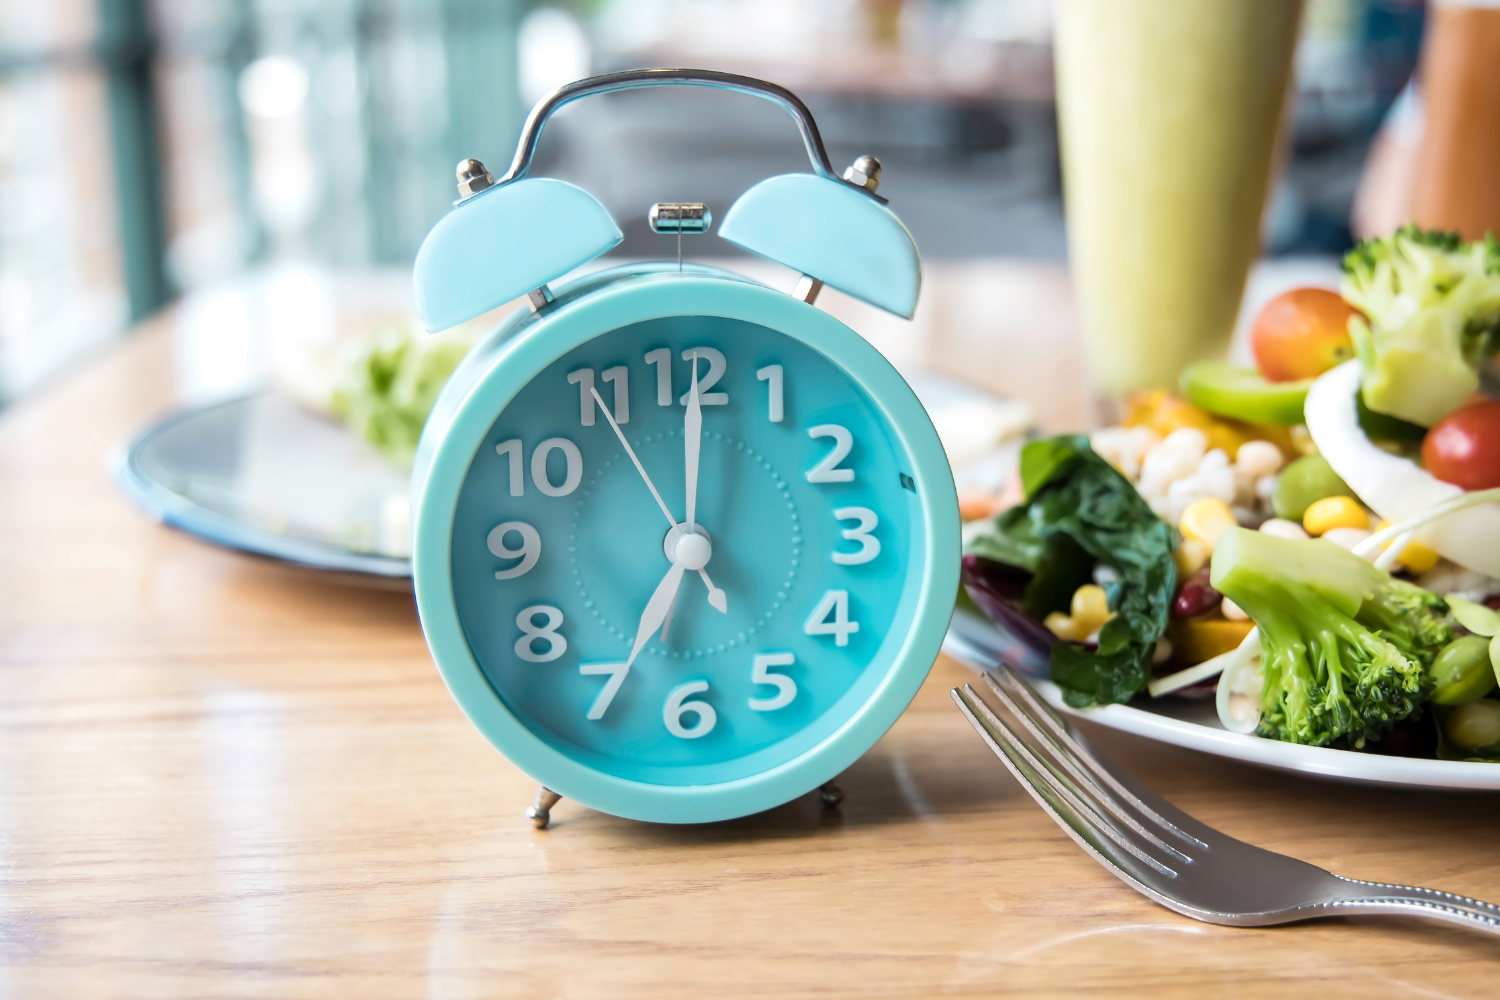 Is intermittent fasting effective for fat loss?